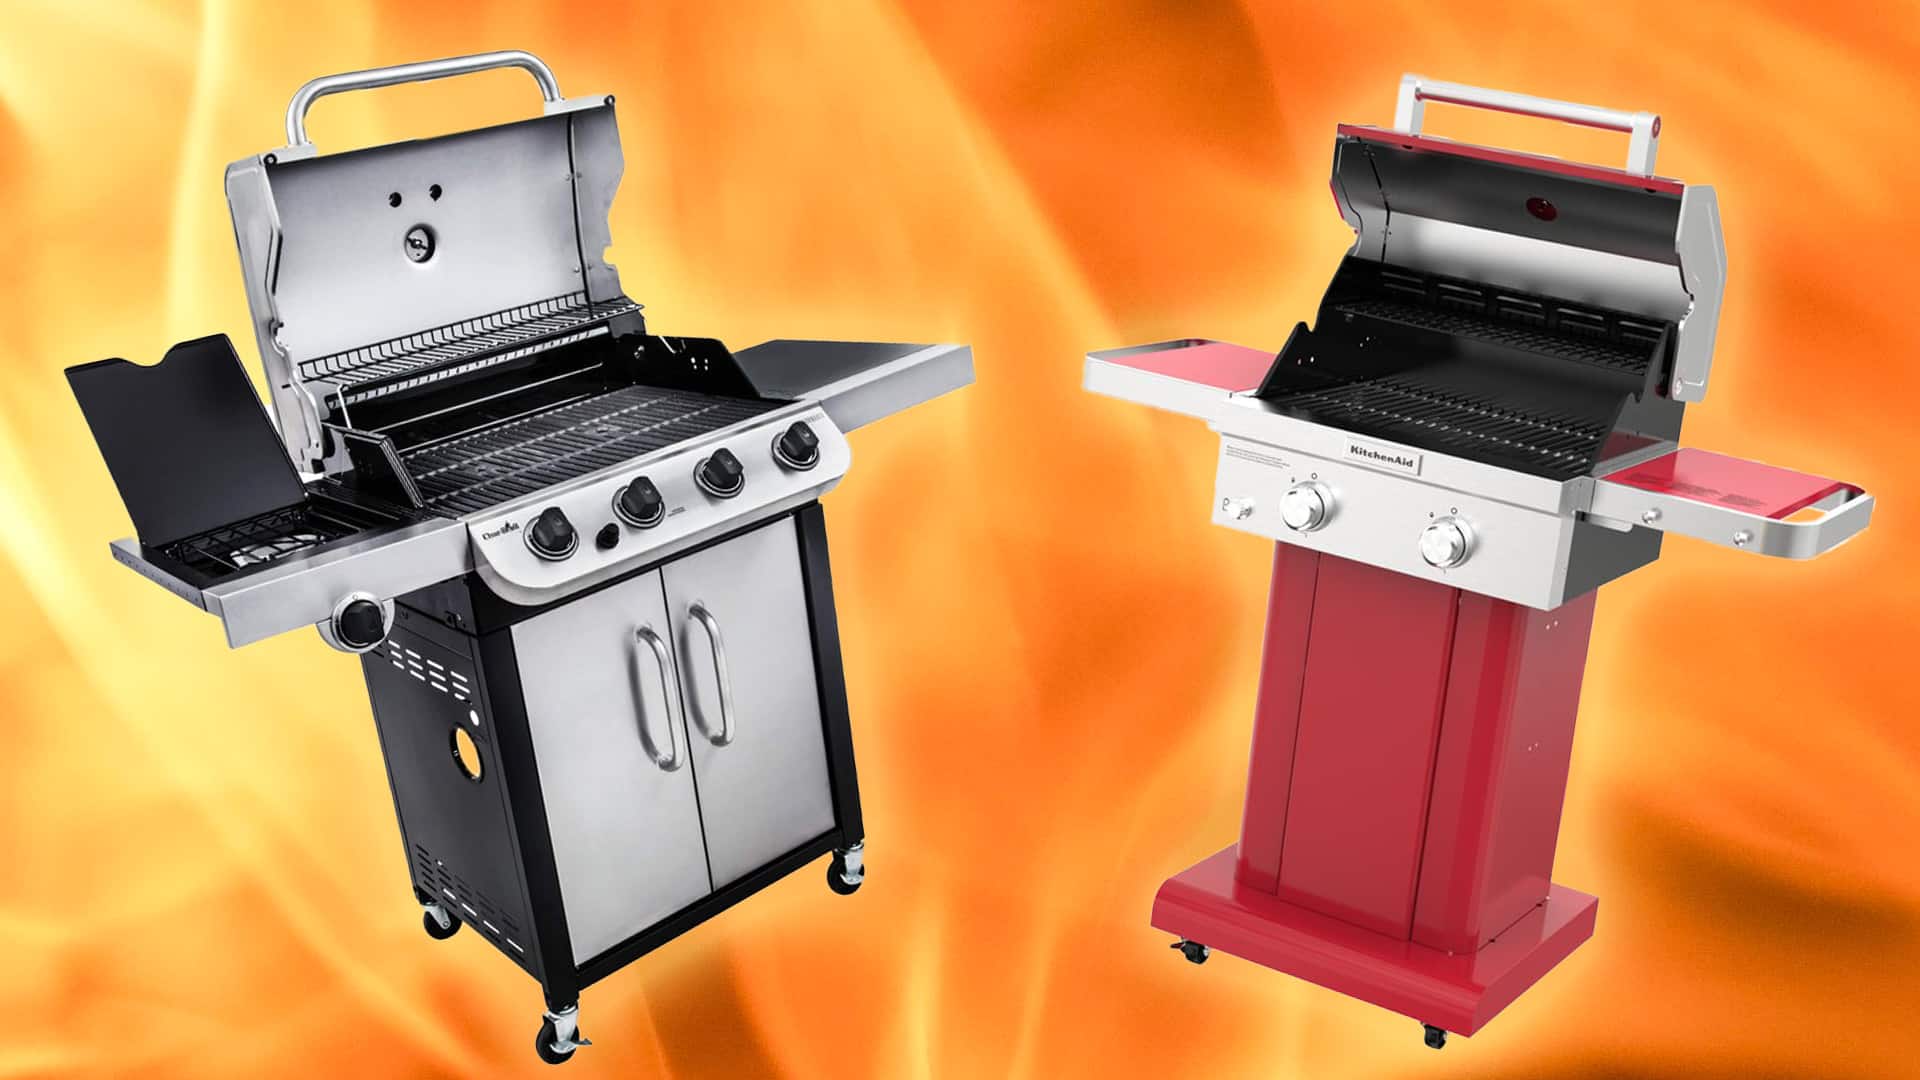 grills on fire background